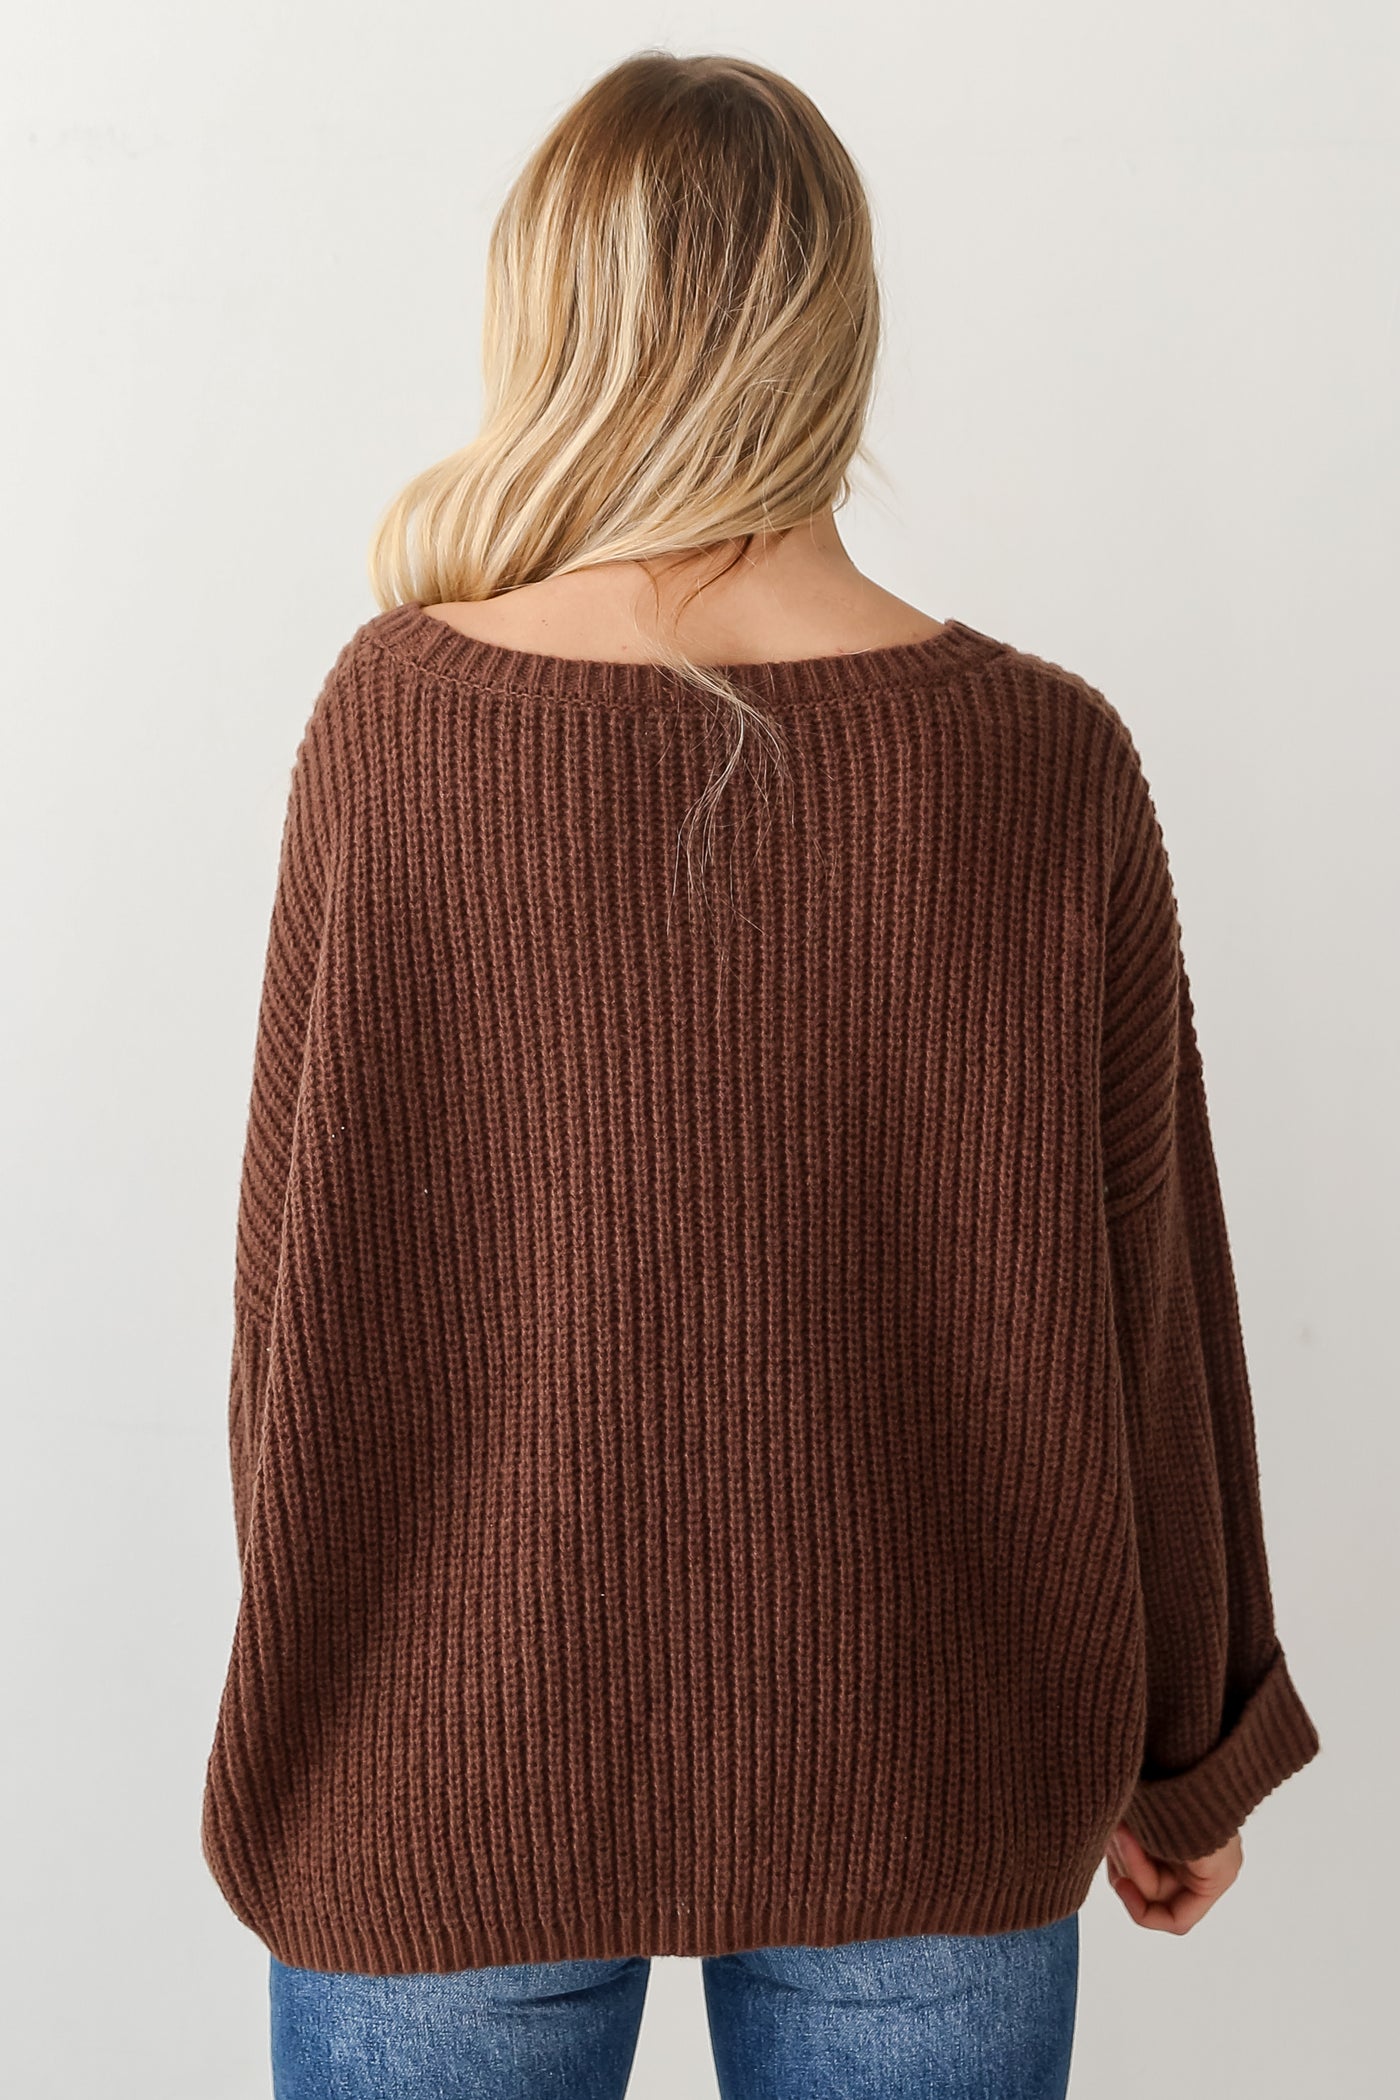 brown Oversized Sweater back view